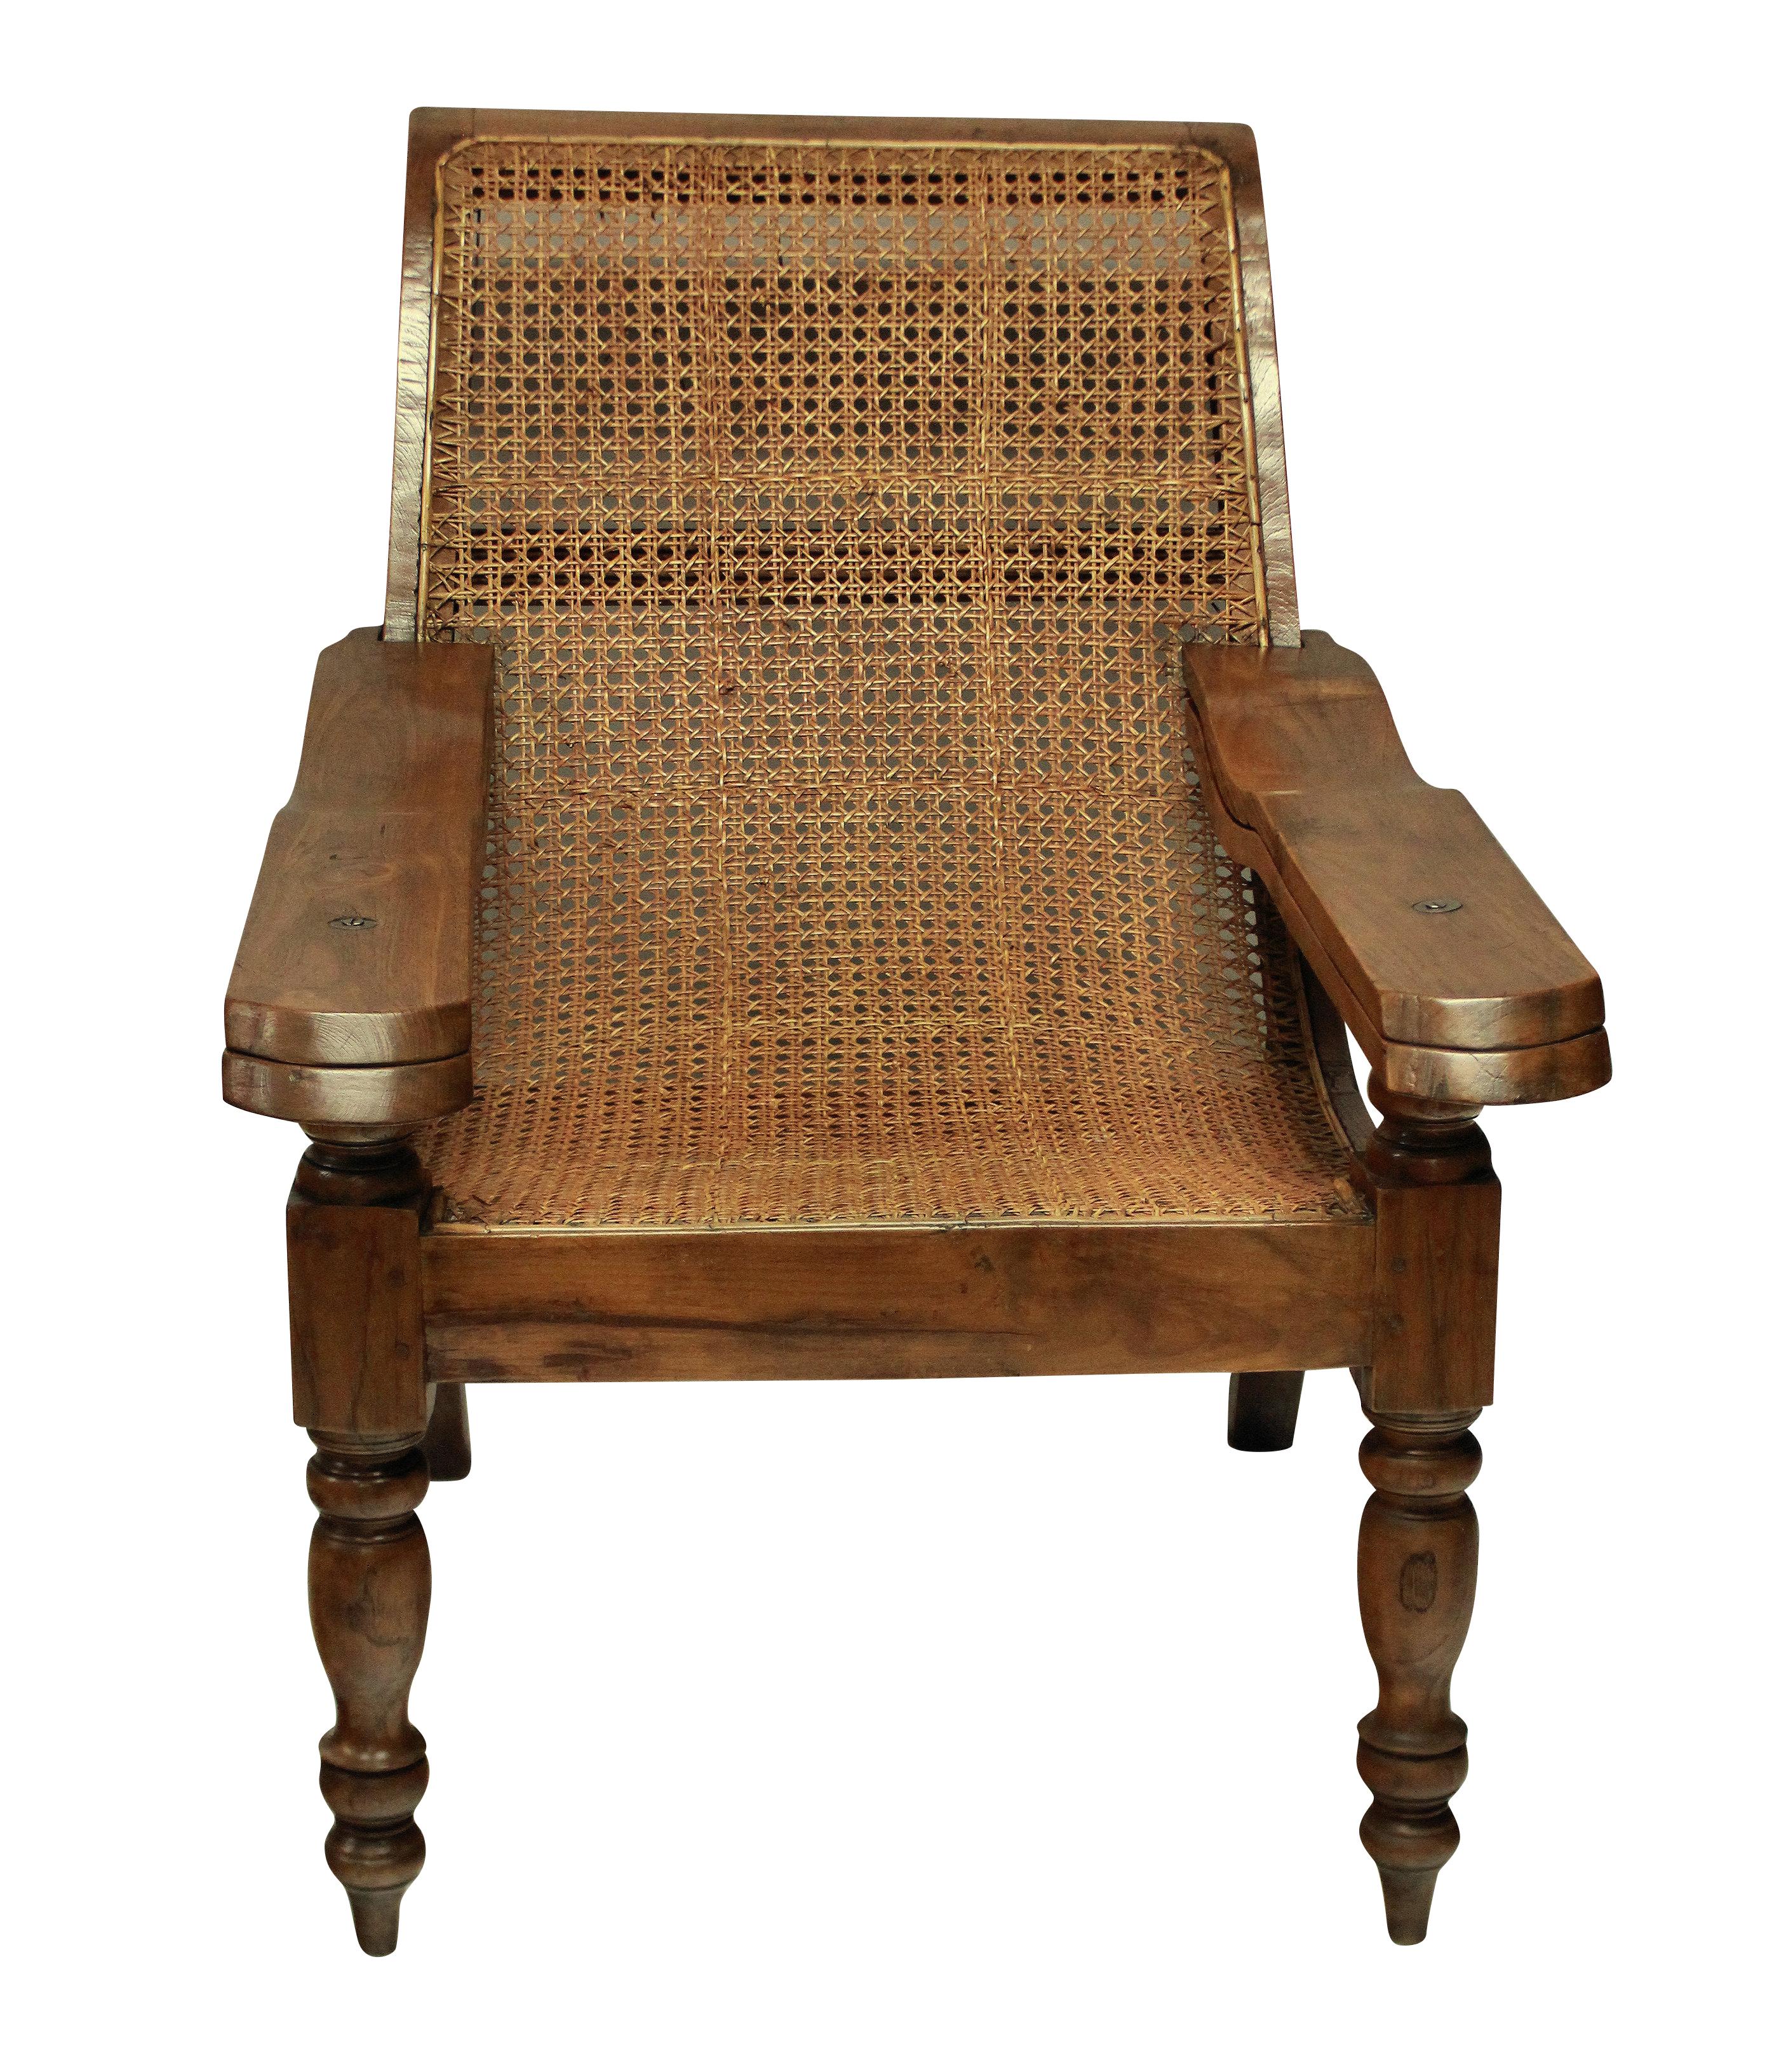 A large colonial, solid teak plantation chair, beautifully restored and with its original cane work intact. With swing-out leg rests.

Measures: 97cm high (back) x 47cm high (seat) x 72cm wide x 115cm deep x 166cm deep (open).